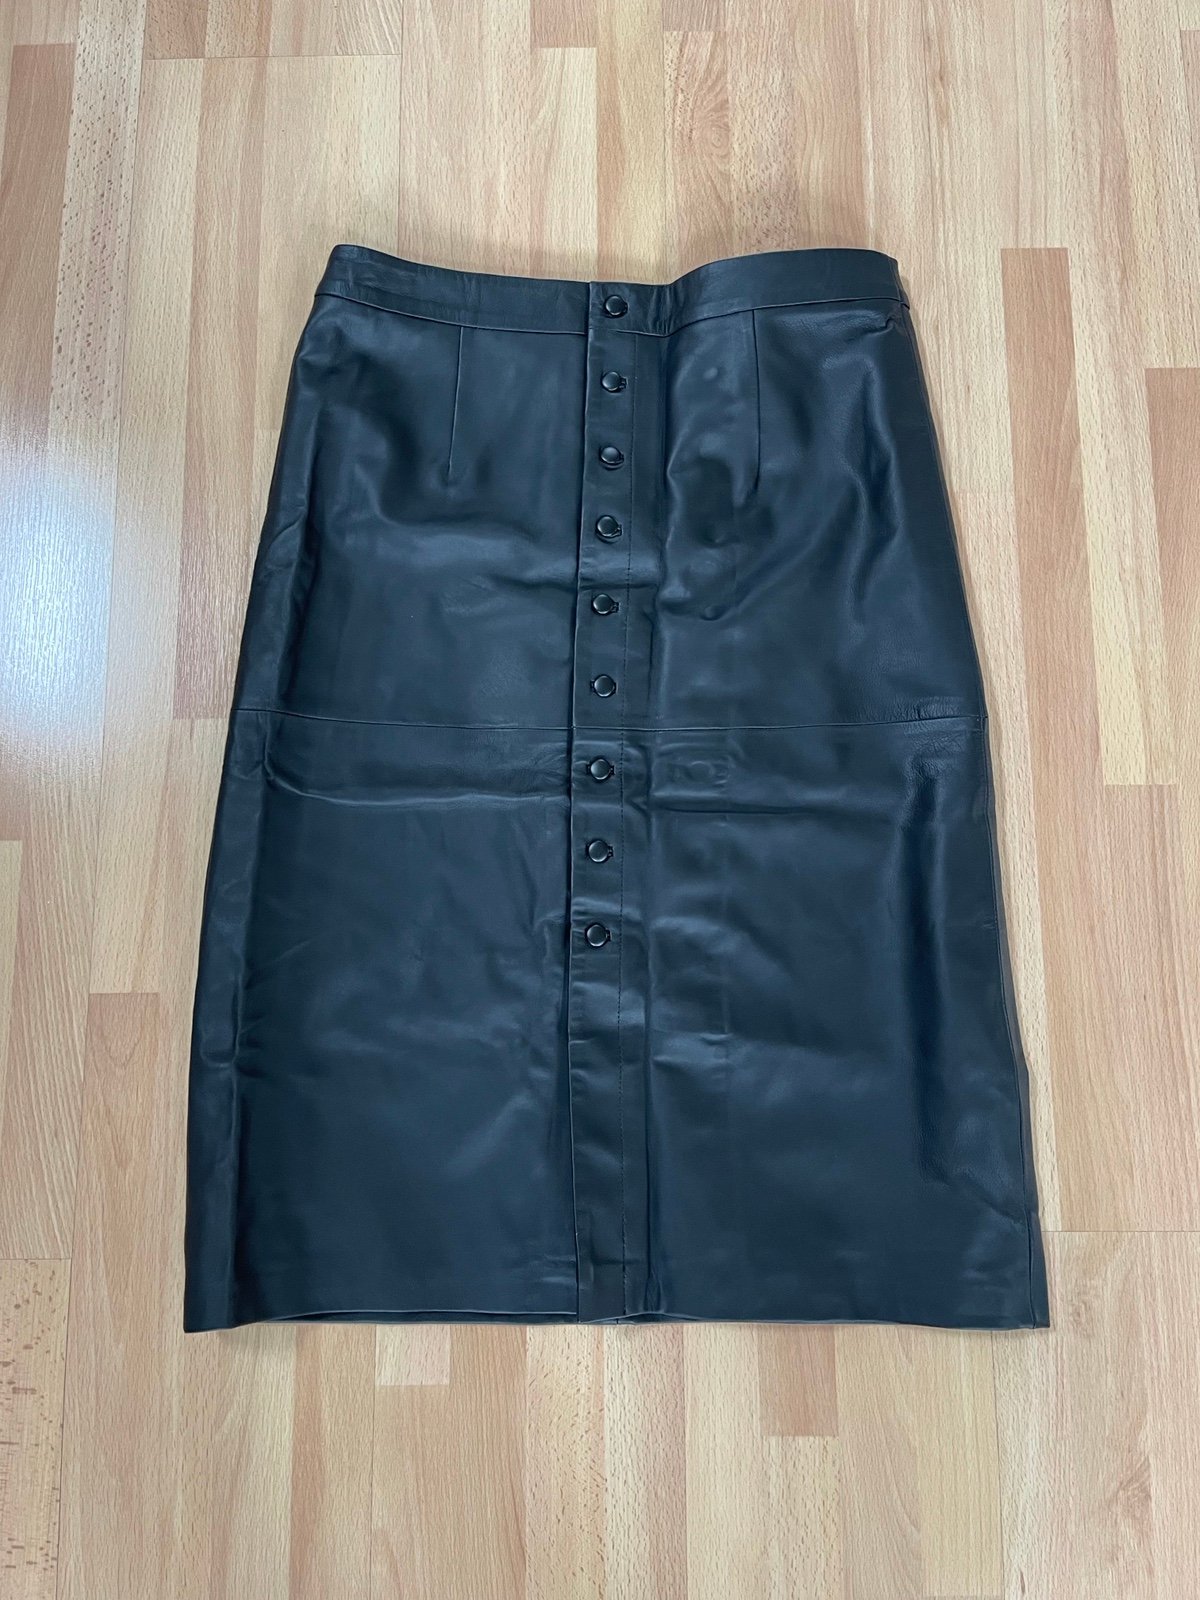 LL Leather Lovers Black Button Front MIDI Skirt 3ySIWZR1z